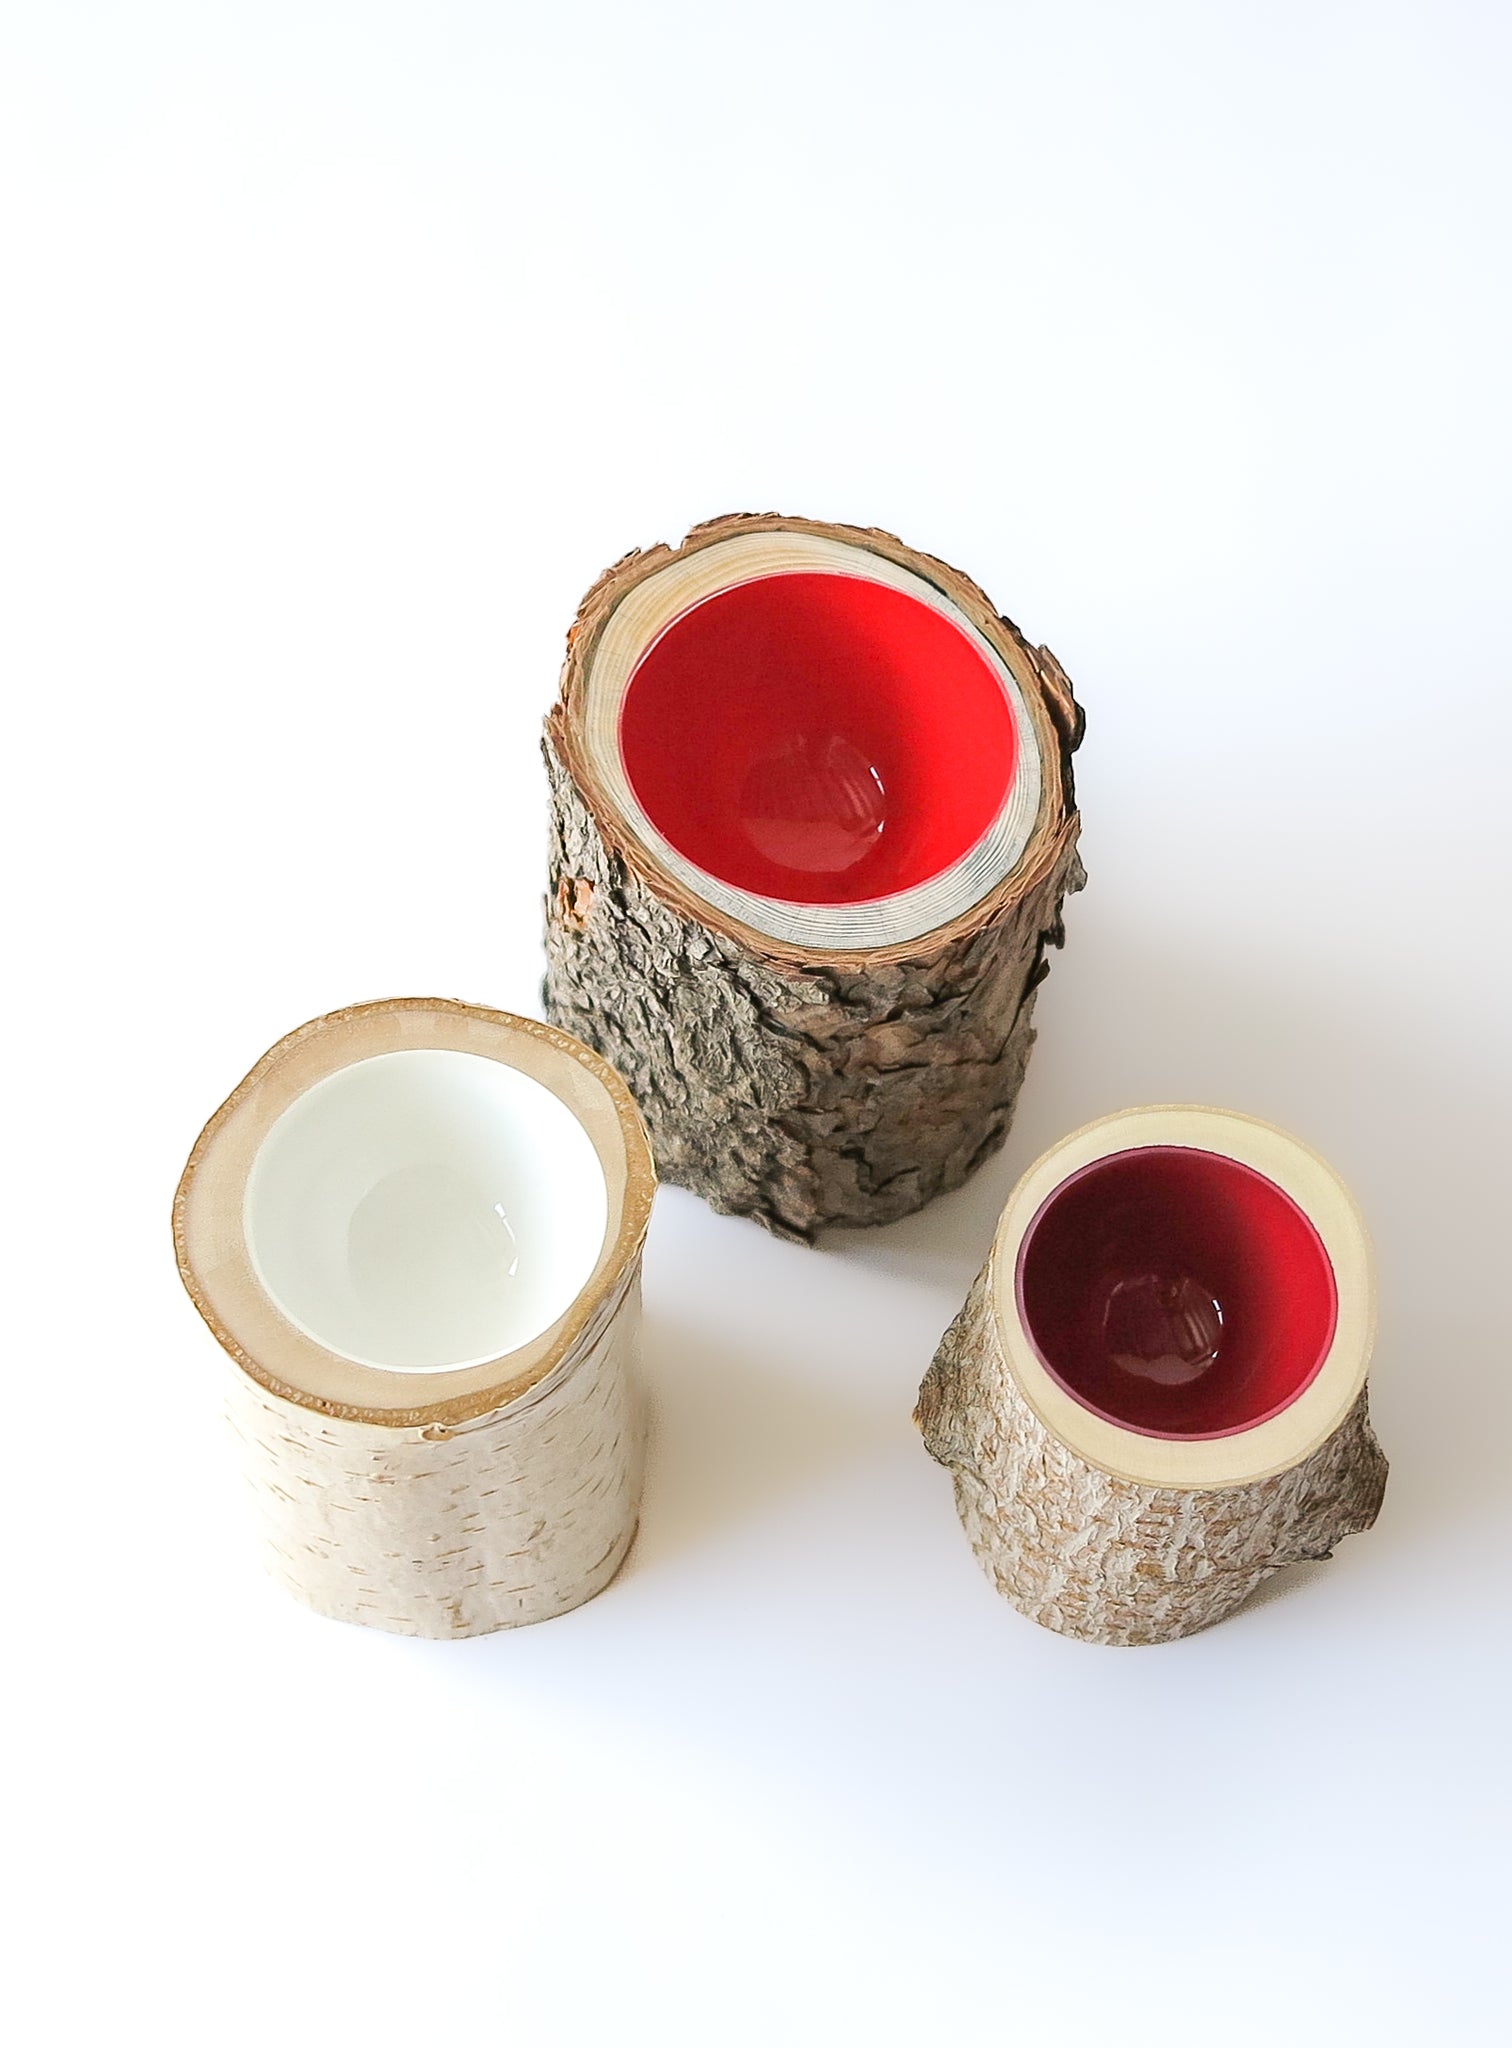 top view of Size 2 Log Bowls - 3 small wooden bowls with various barks, glossy interiors are bright red, dark current red and white in colour.